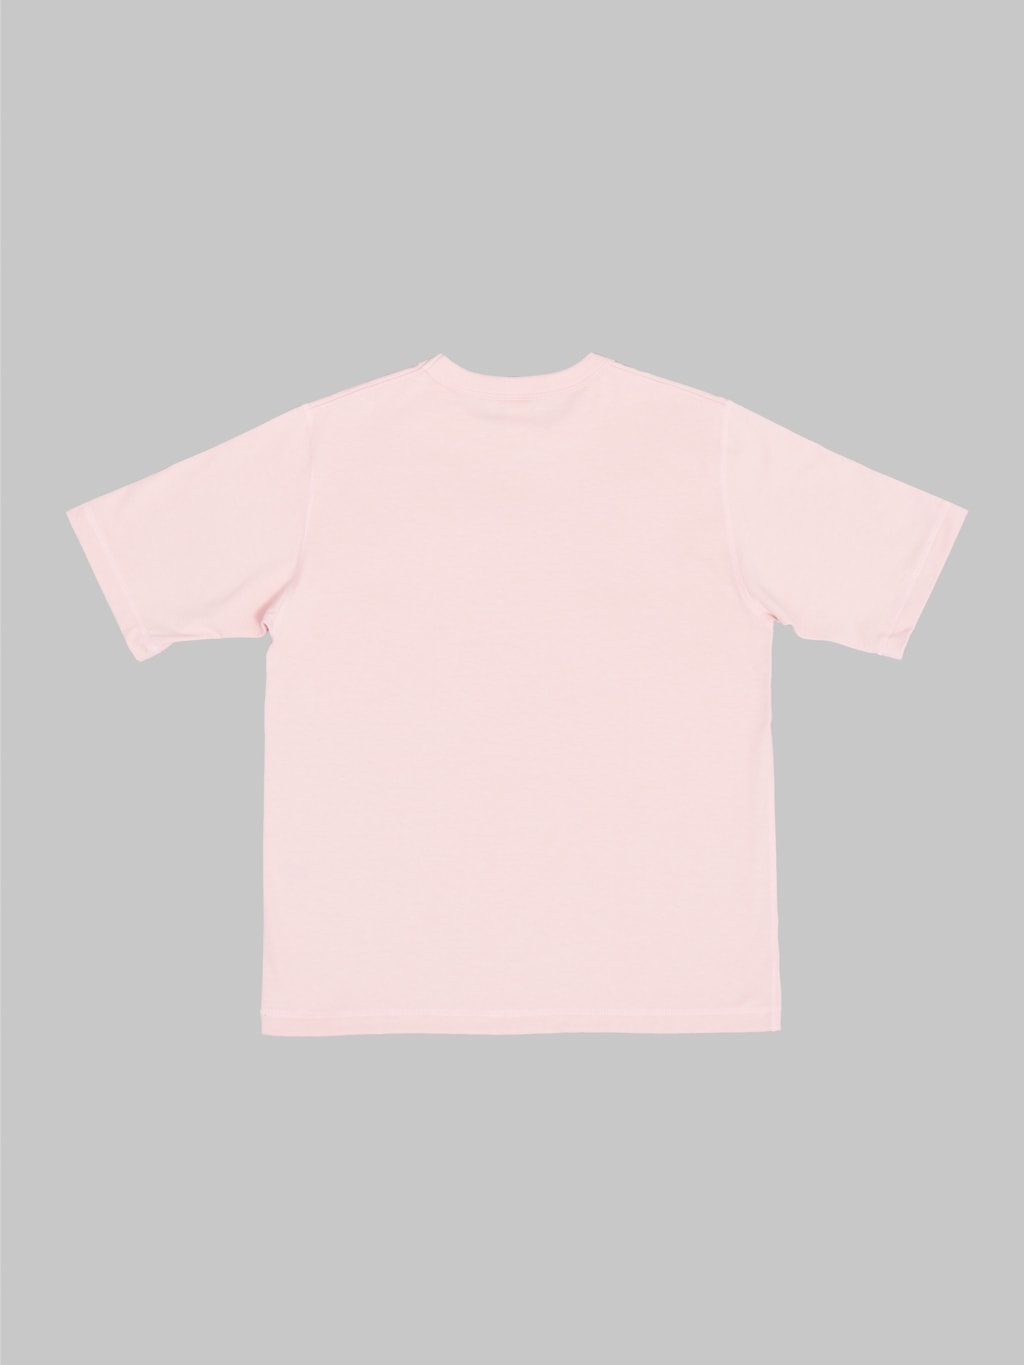 jackman grace tshirt baby pink back fit